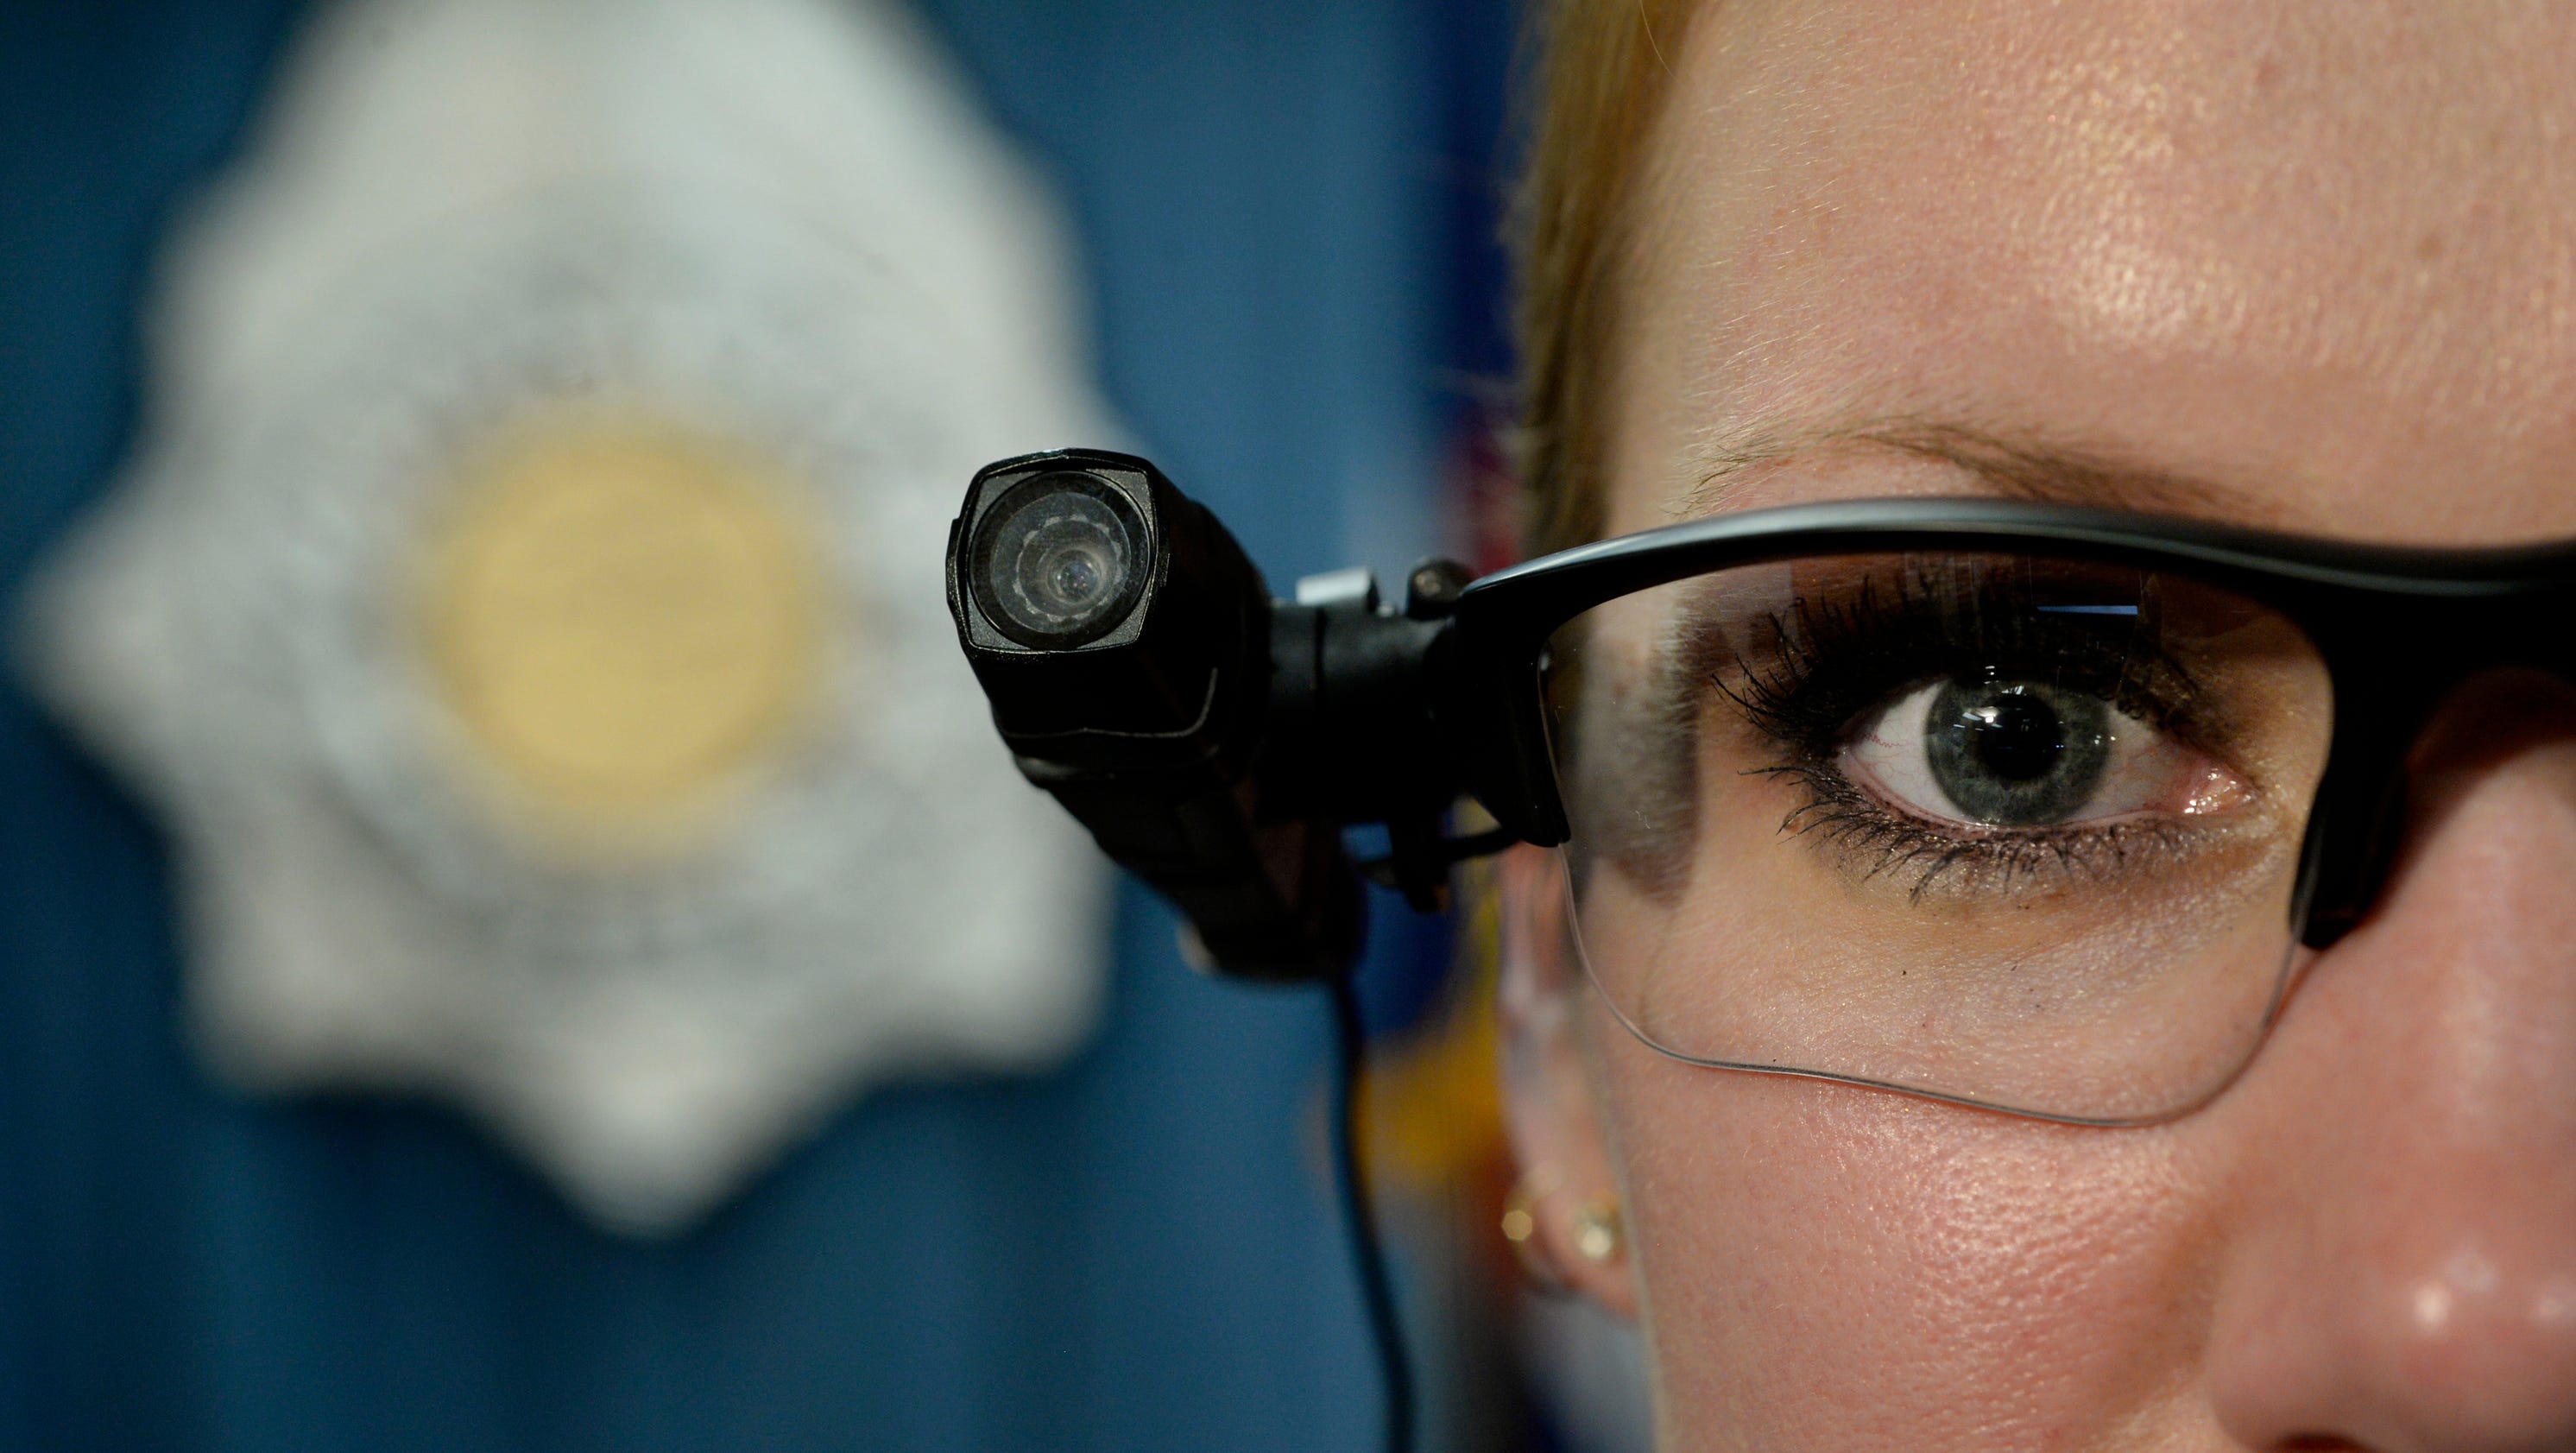 The Pros And Cons To Wear Police Body Cameras